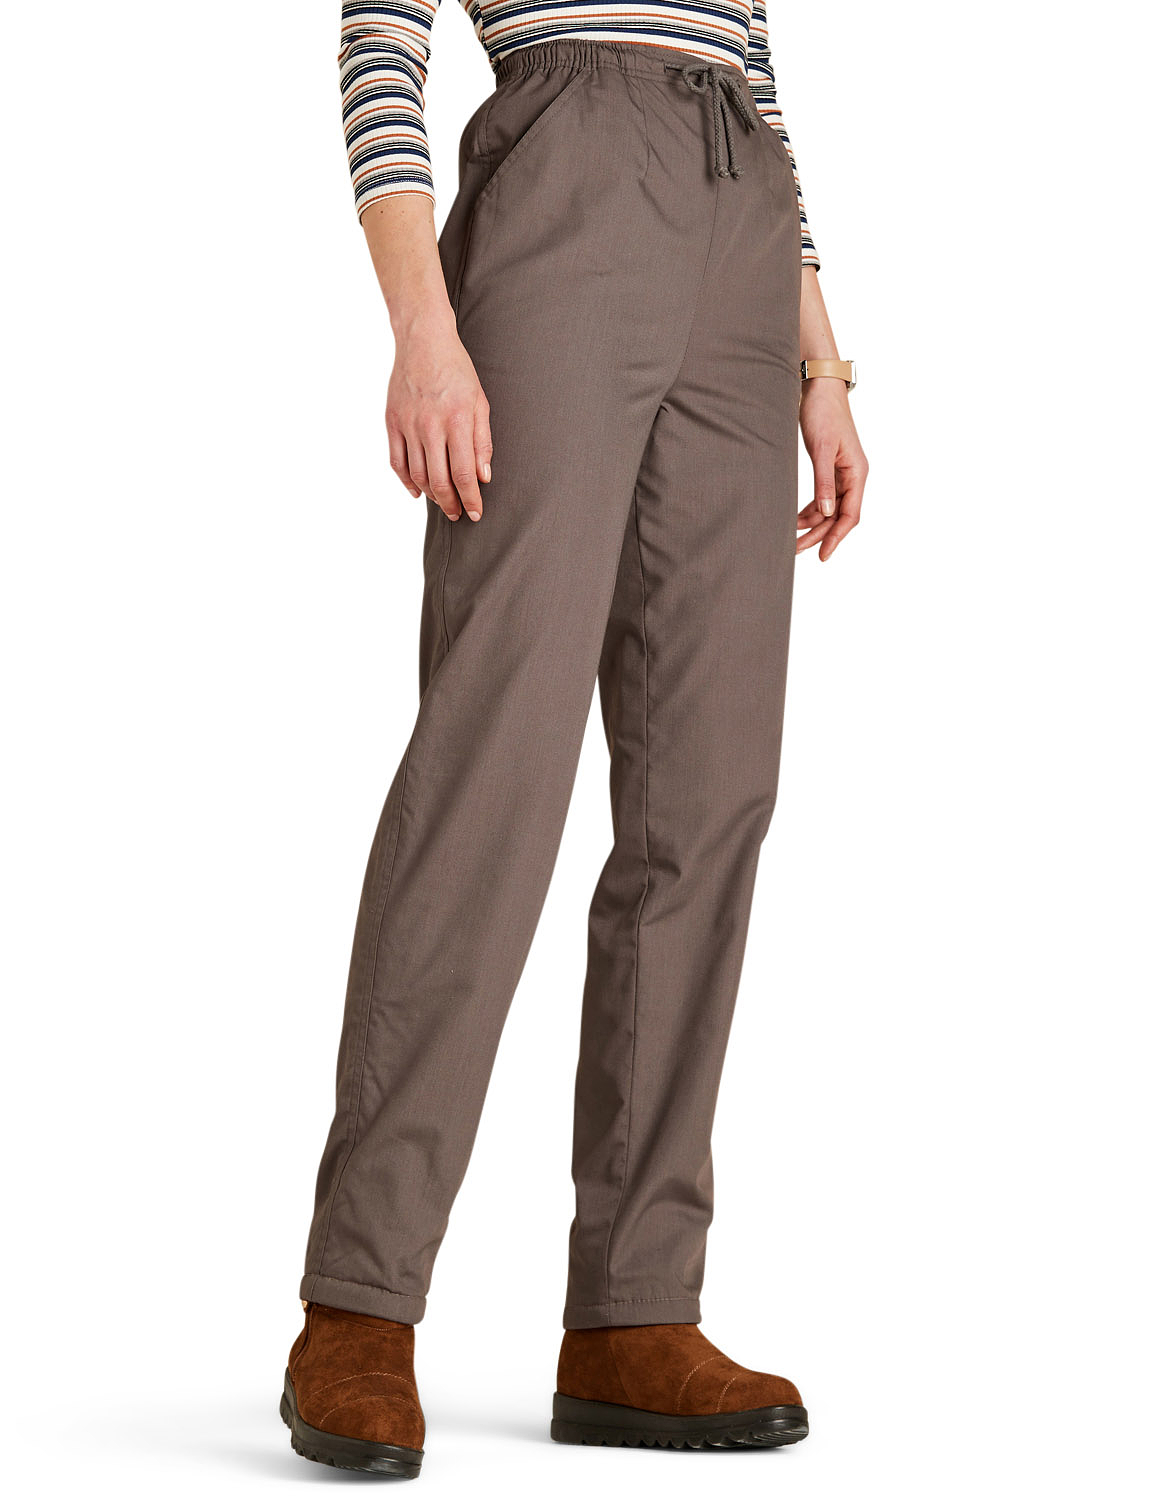 Womens Insulated Legwear  Insulated Trousers  GO Outdoors